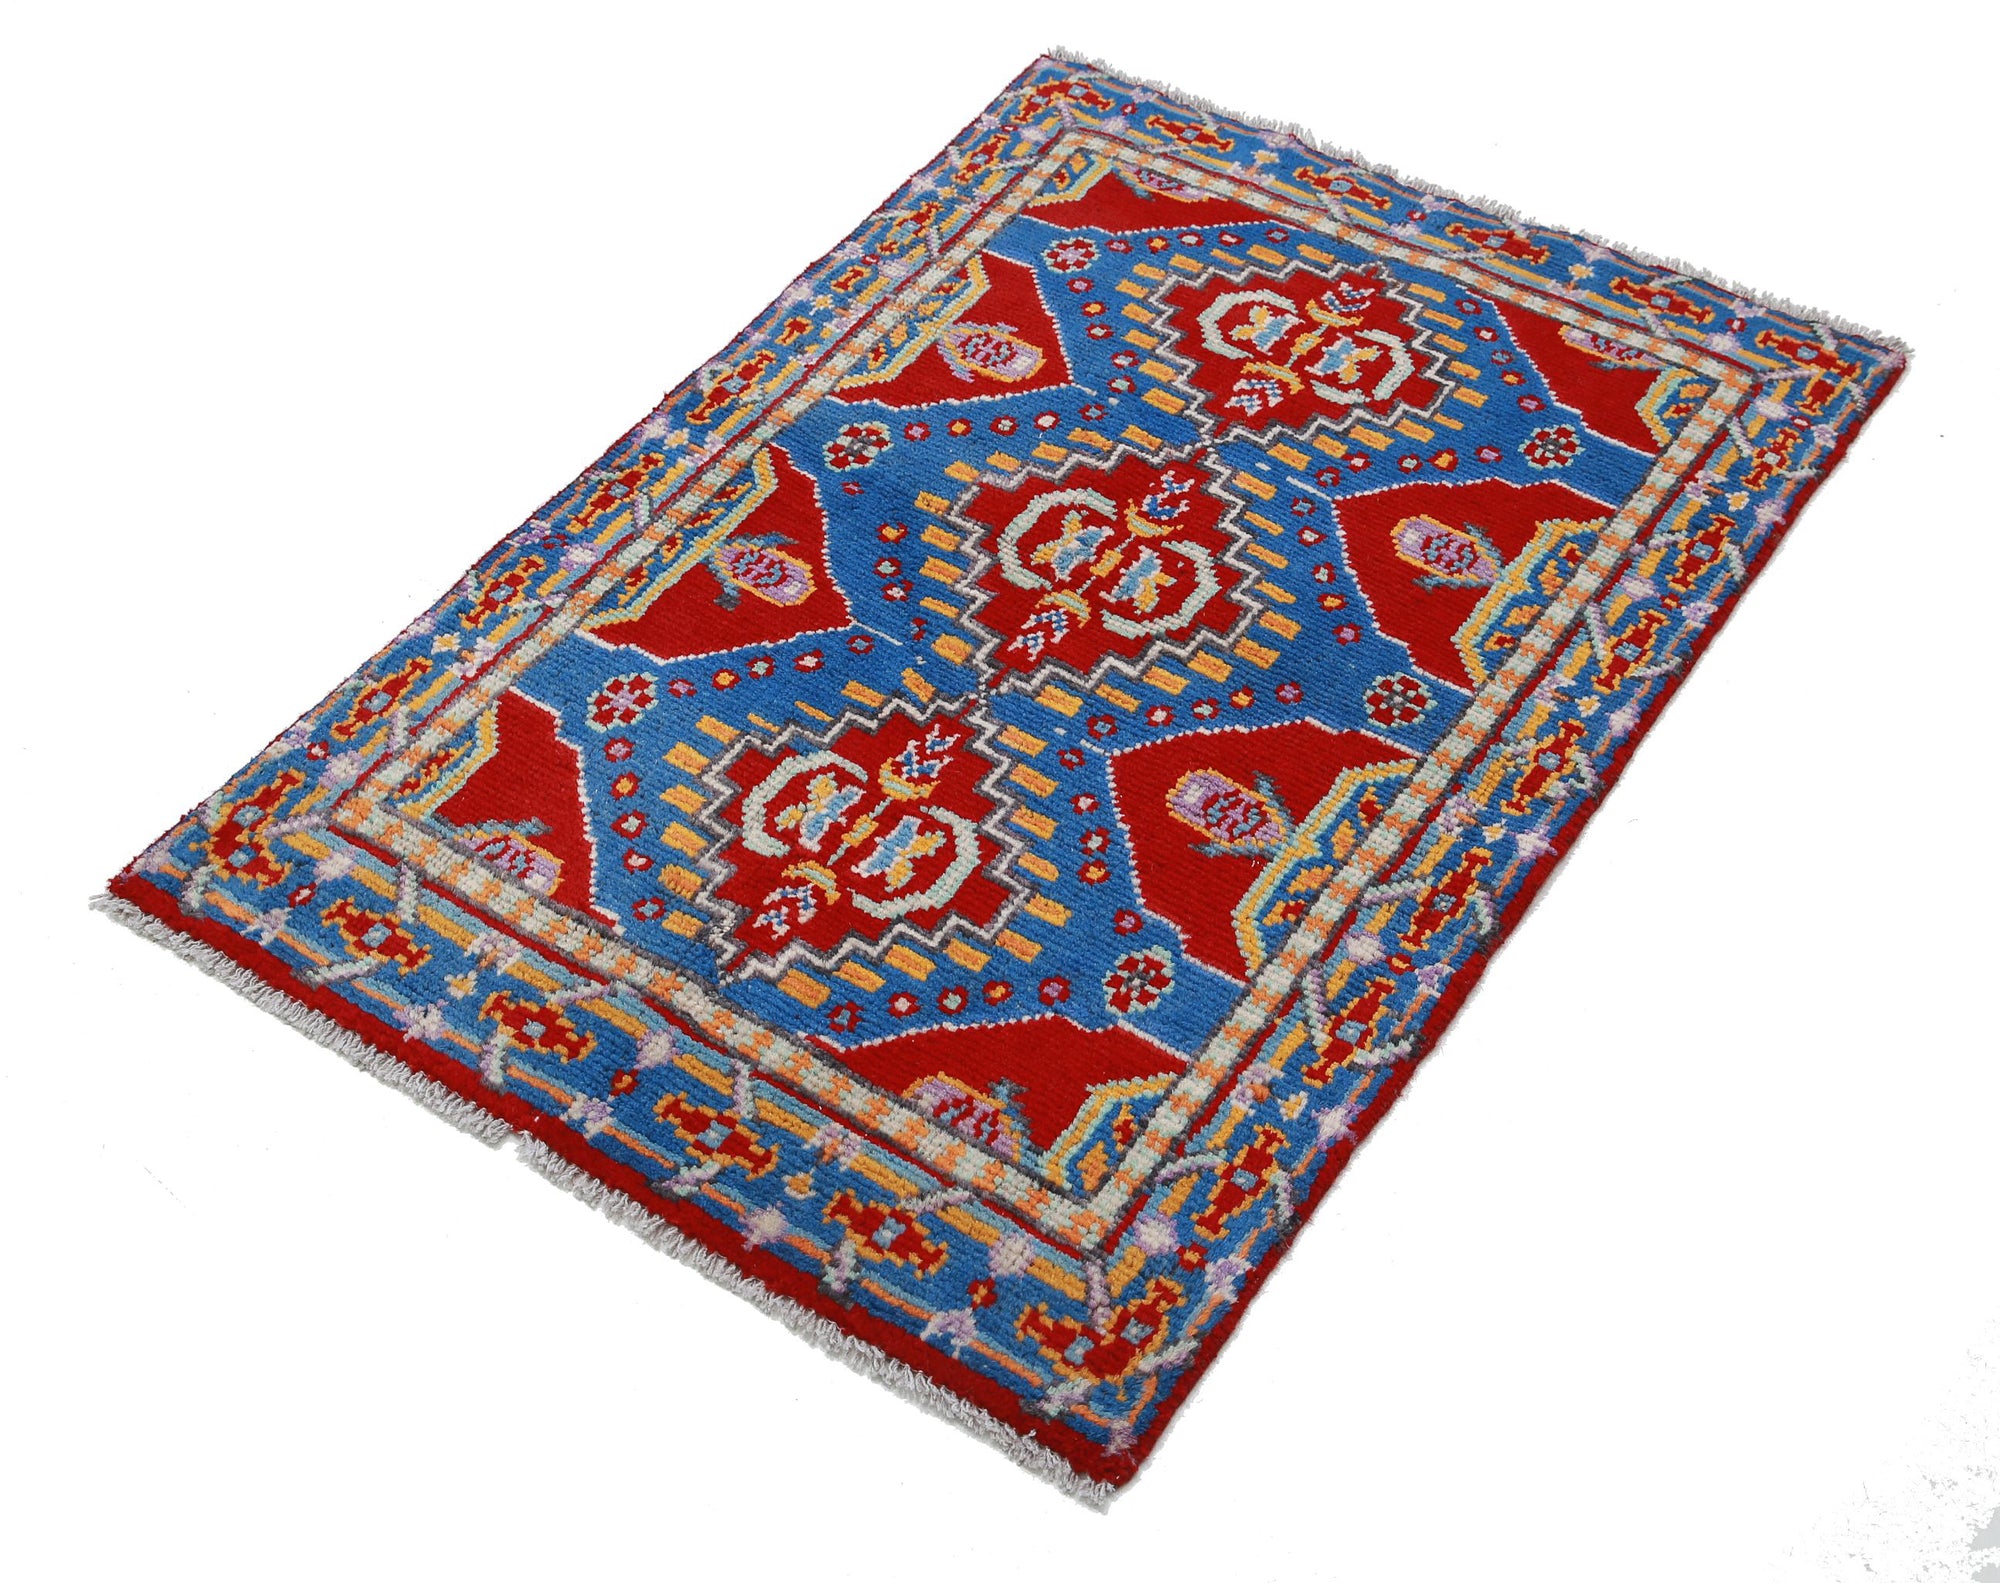 Revival-hand-knotted-qarghani-wool-rug-5014187-2.jpg